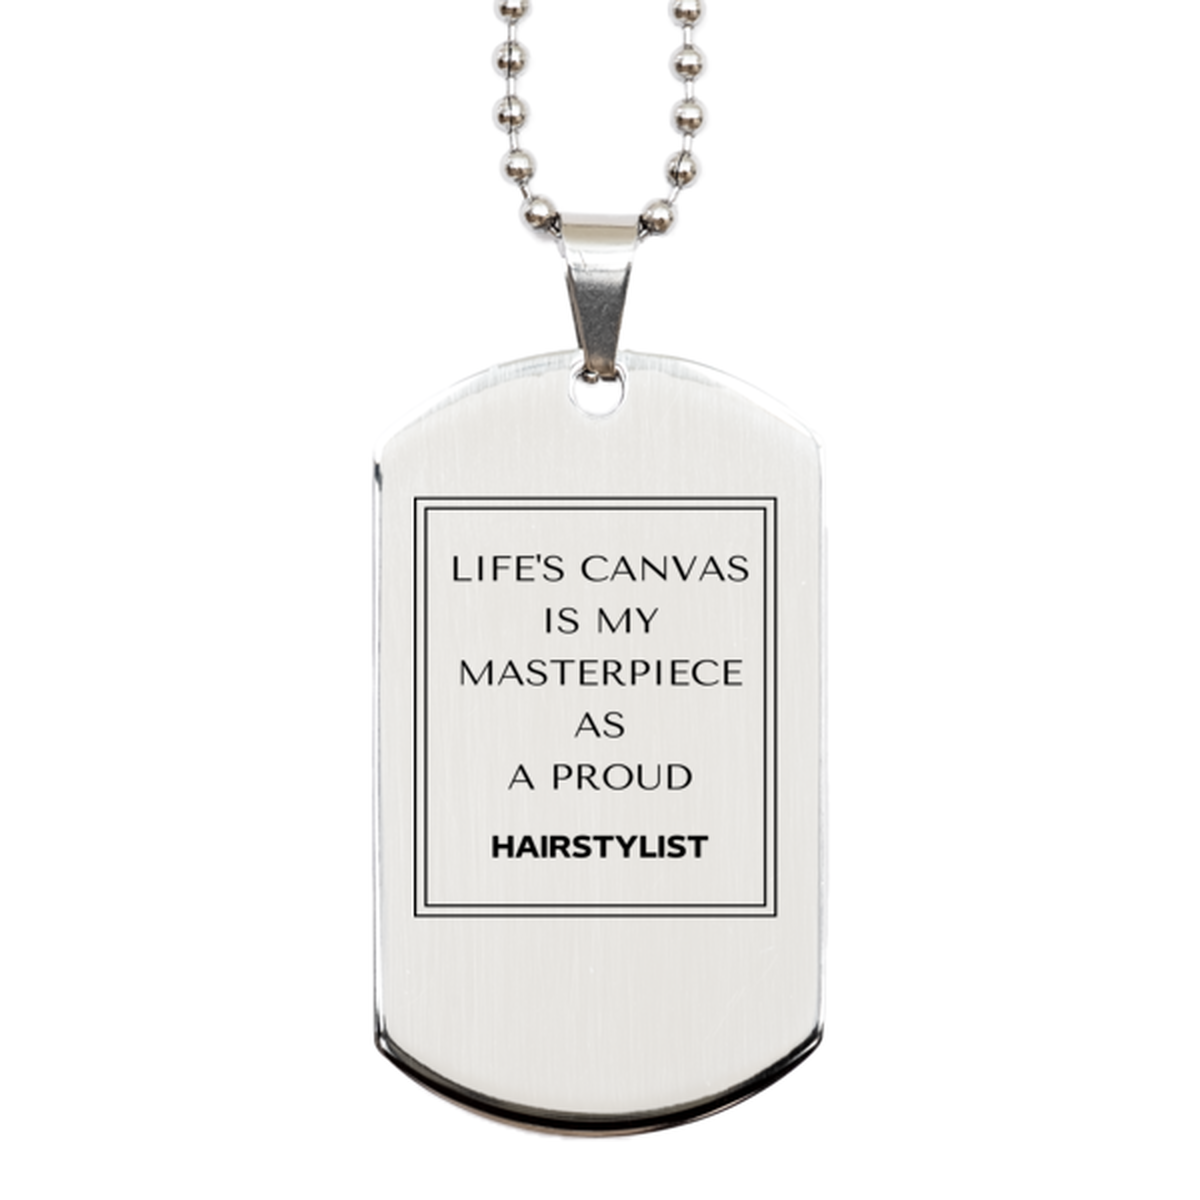 Proud Hairstylist Gifts, Life's canvas is my masterpiece, Epic Birthday Christmas Unique Silver Dog Tag For Hairstylist, Coworkers, Men, Women, Friends